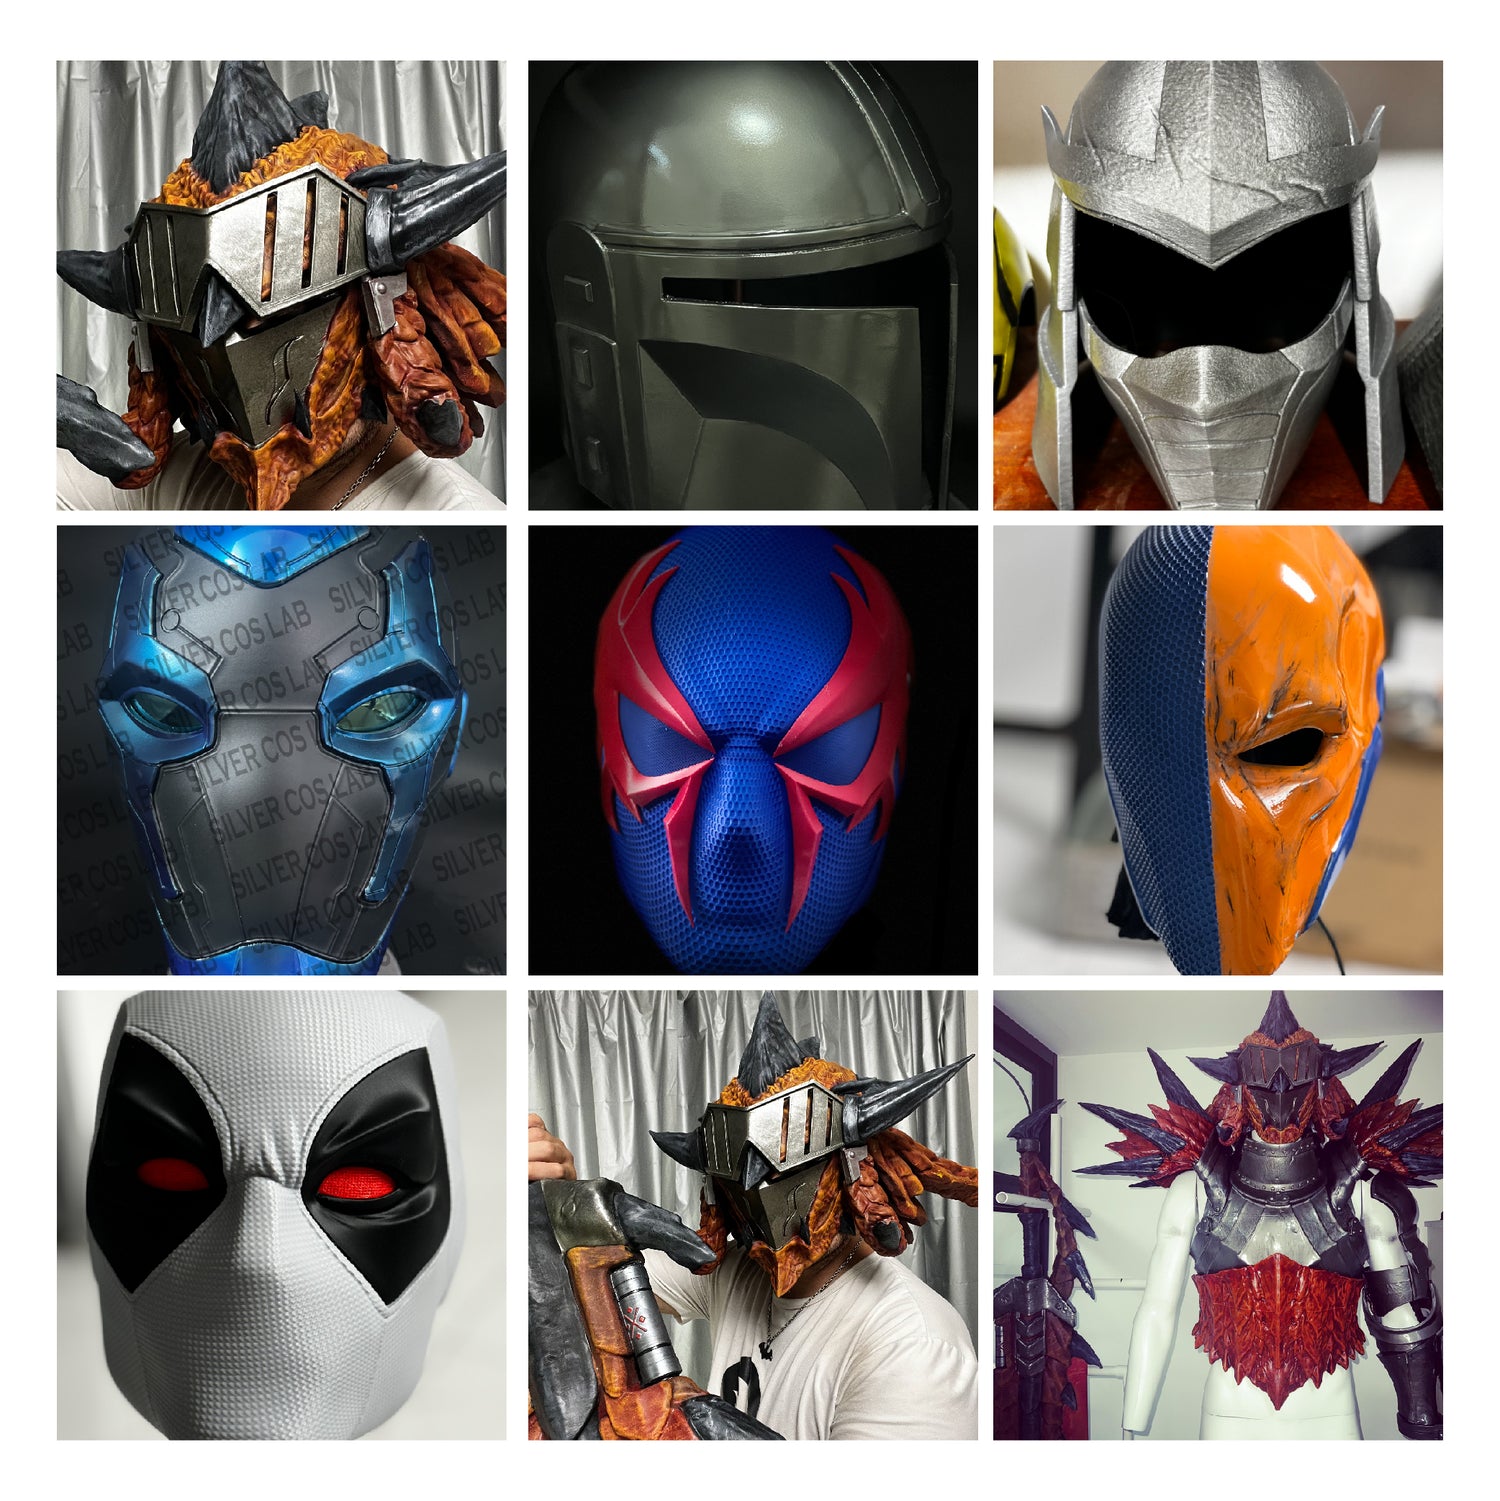 The king of 3D printed masks